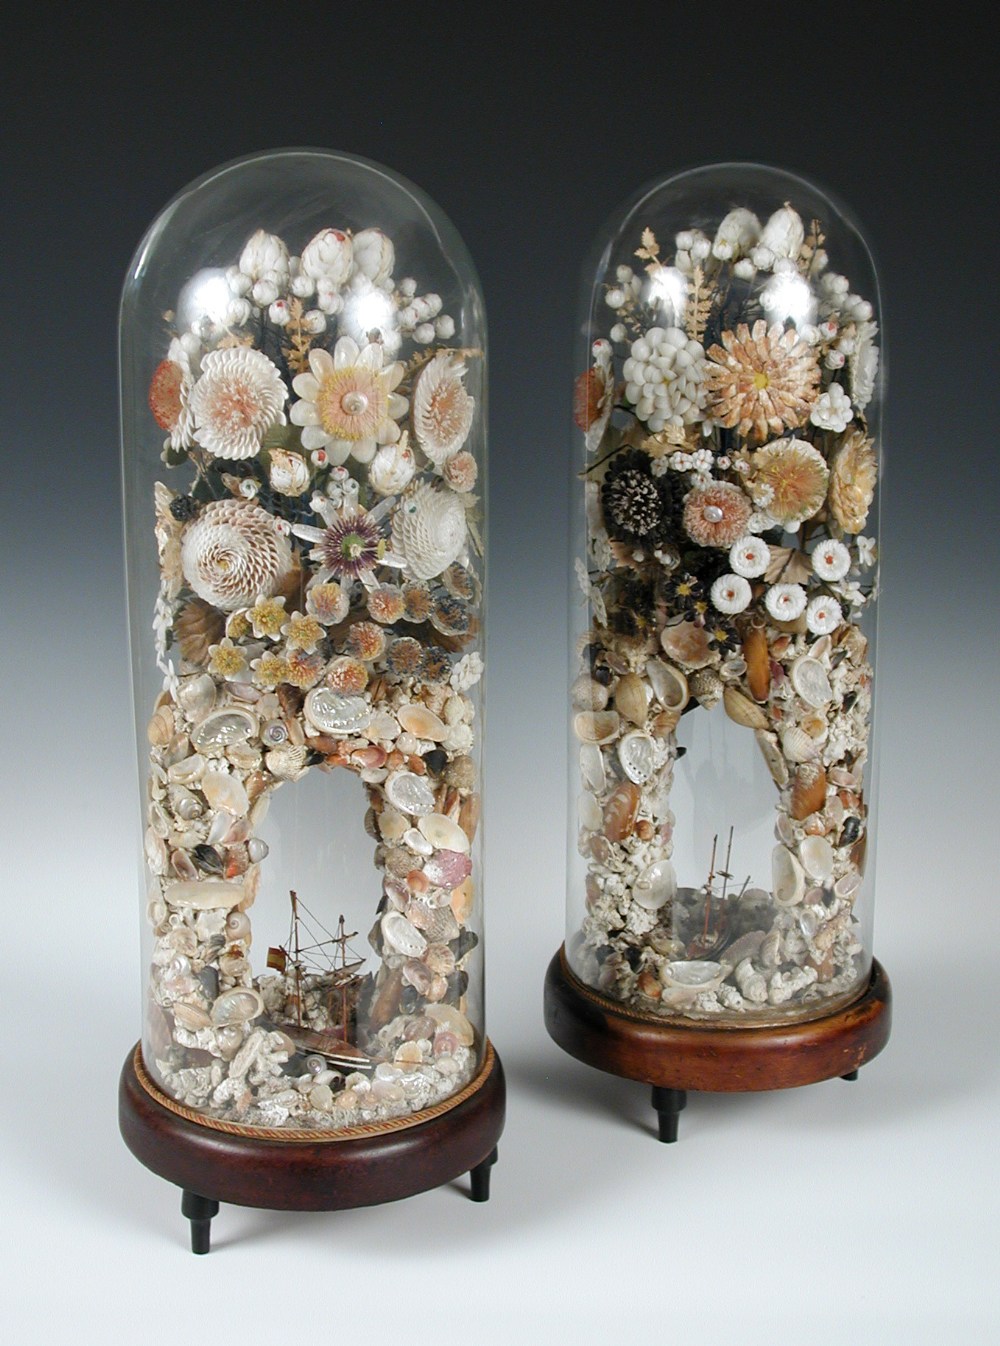 A pair of Victorian shell displays beneath glass domes, each worked with floral sprays in coloured